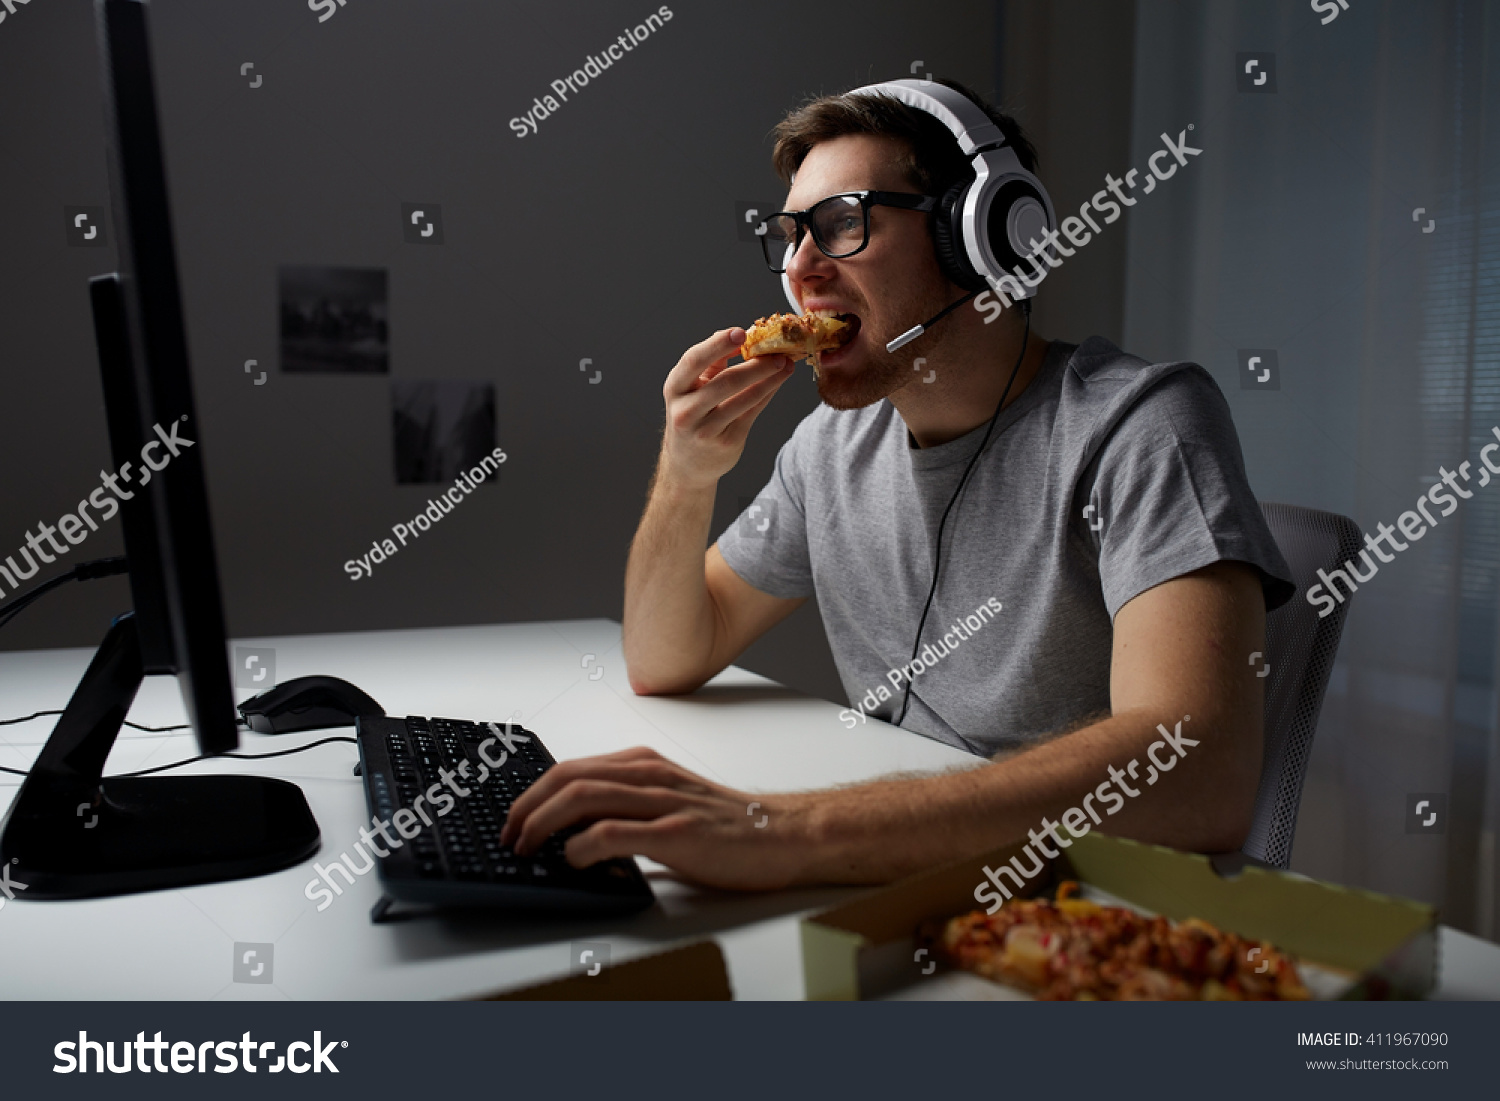 technology, gaming, entertainment, let's play and people concept - young man in headset with pc computer eating pizza while playing game at home and streaming playthrough or walkthrough video #411967090